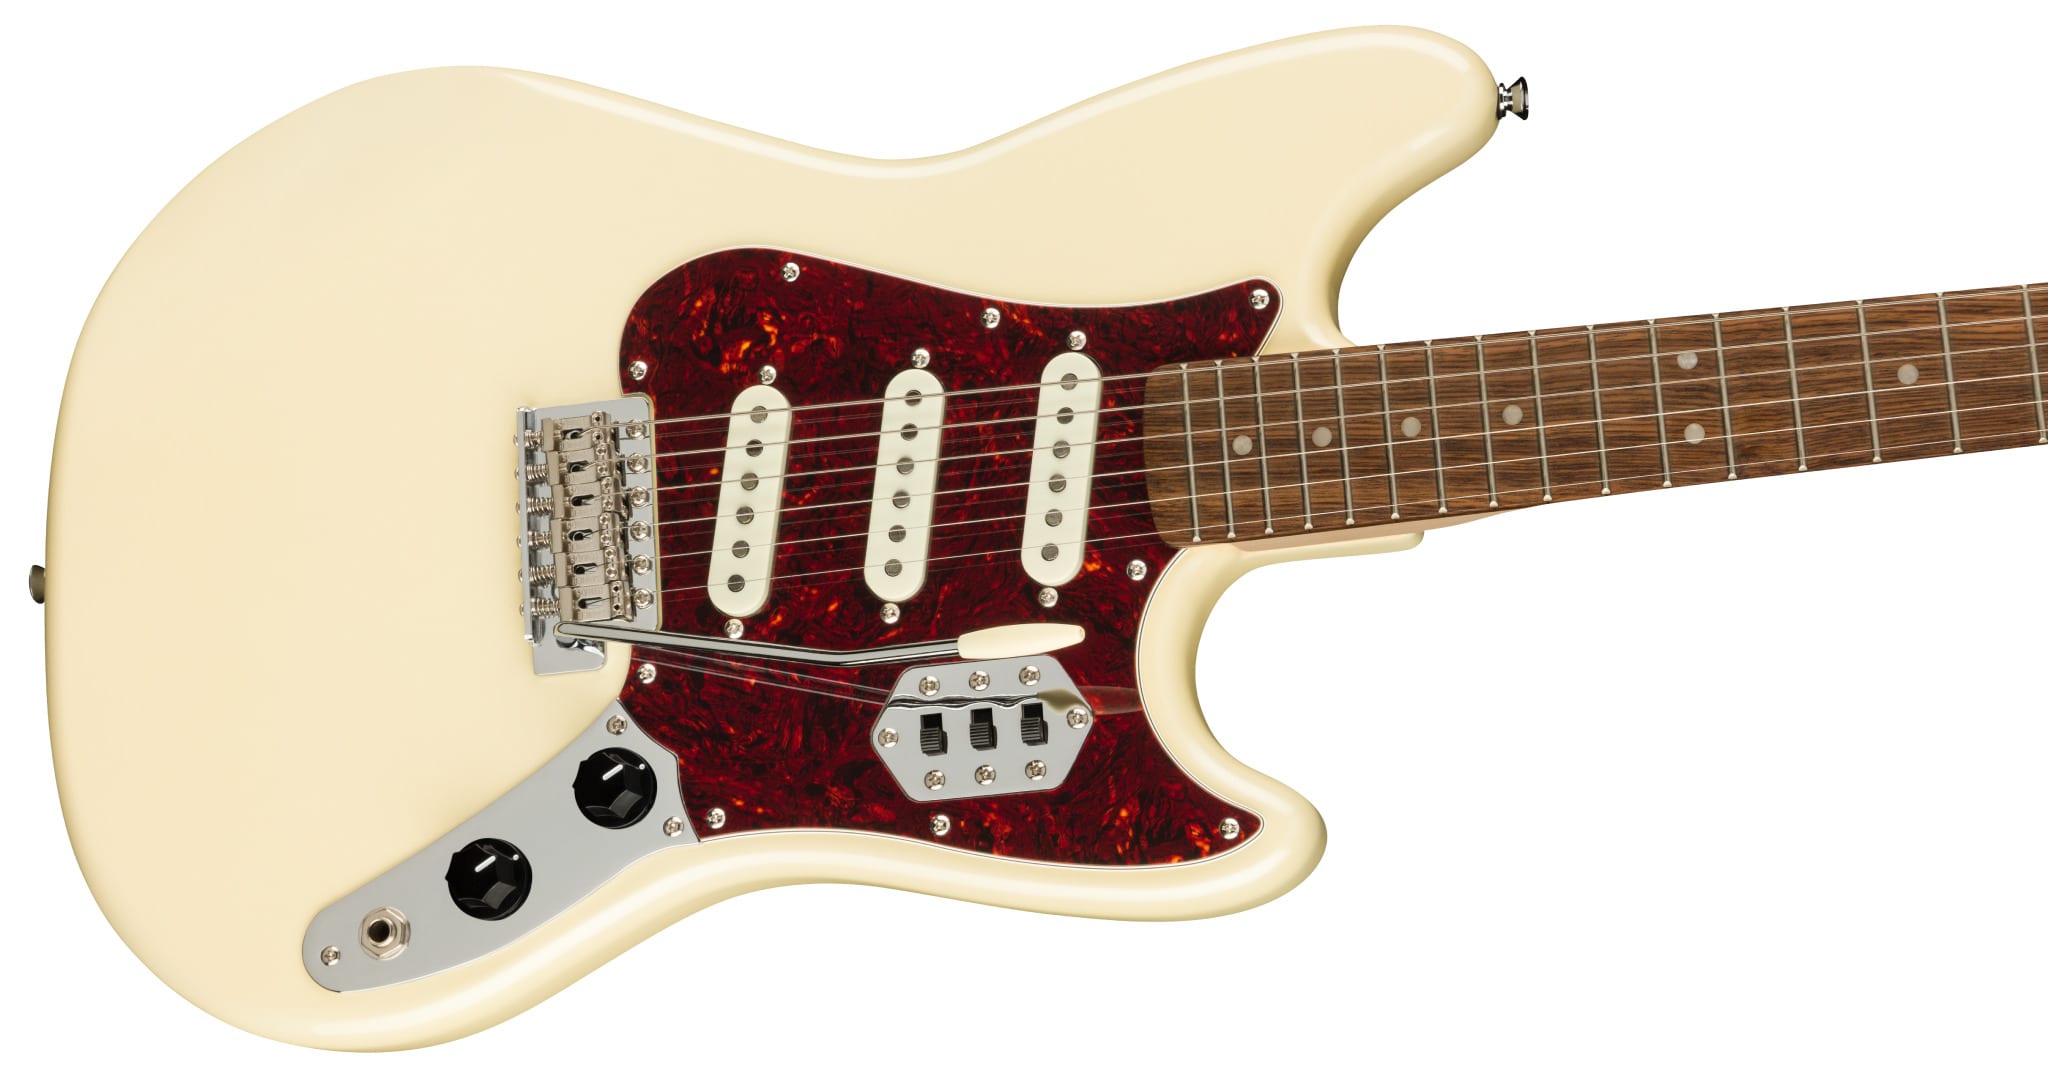 Squier Paranormal Range Cyclone in Pearl White